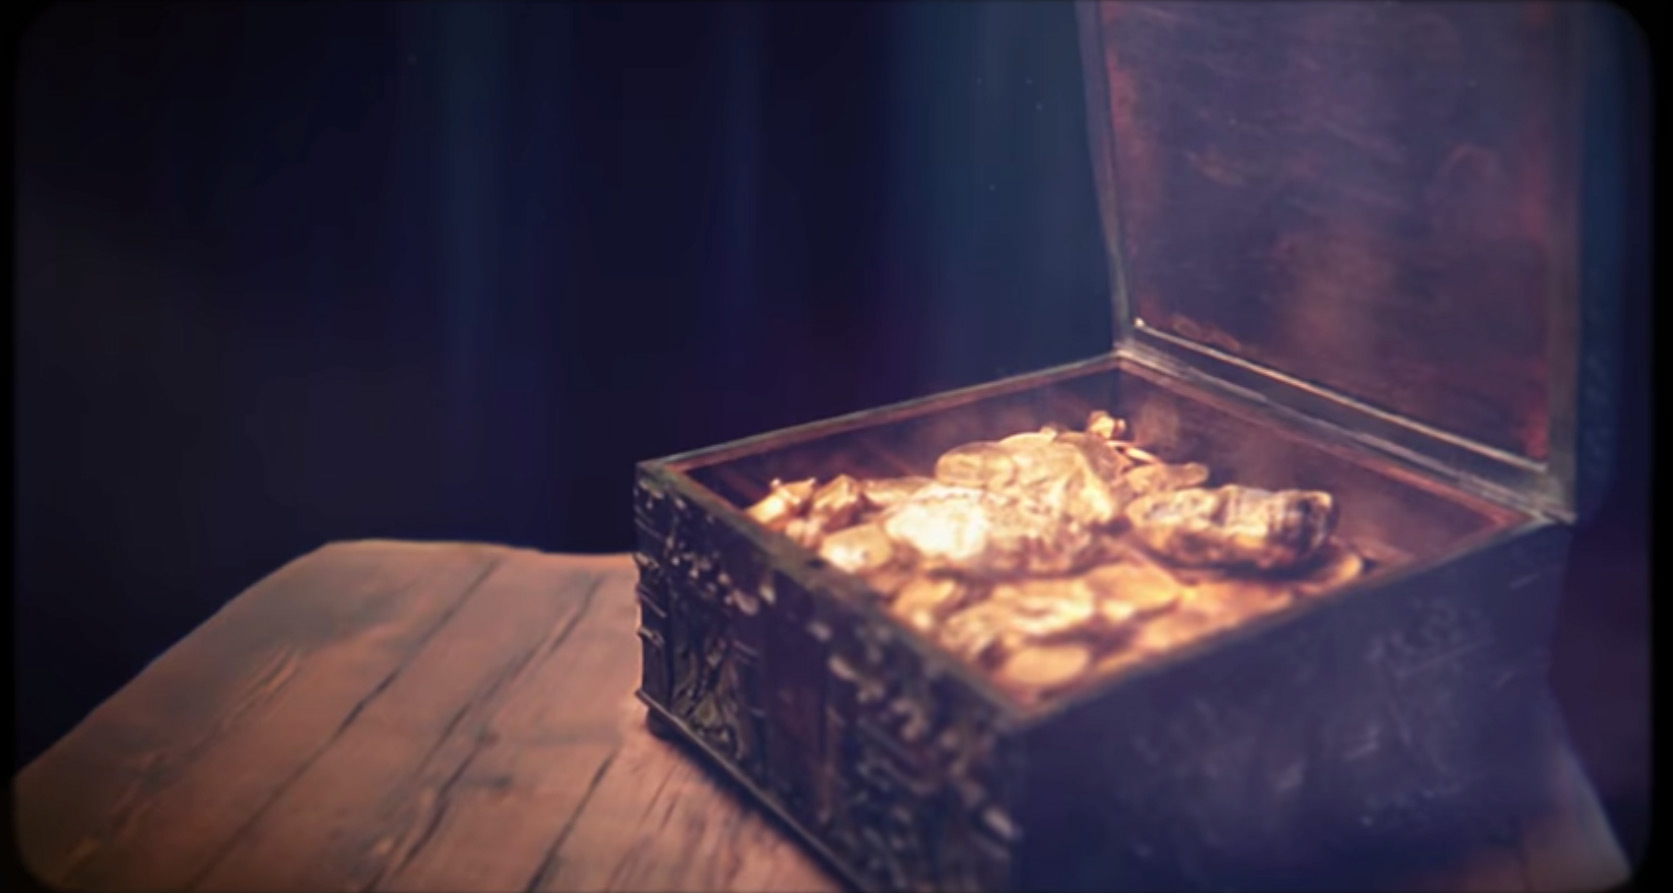 PHOTO: Forrest Fenn hid a chest of treasure, similar to the one pictured in this video